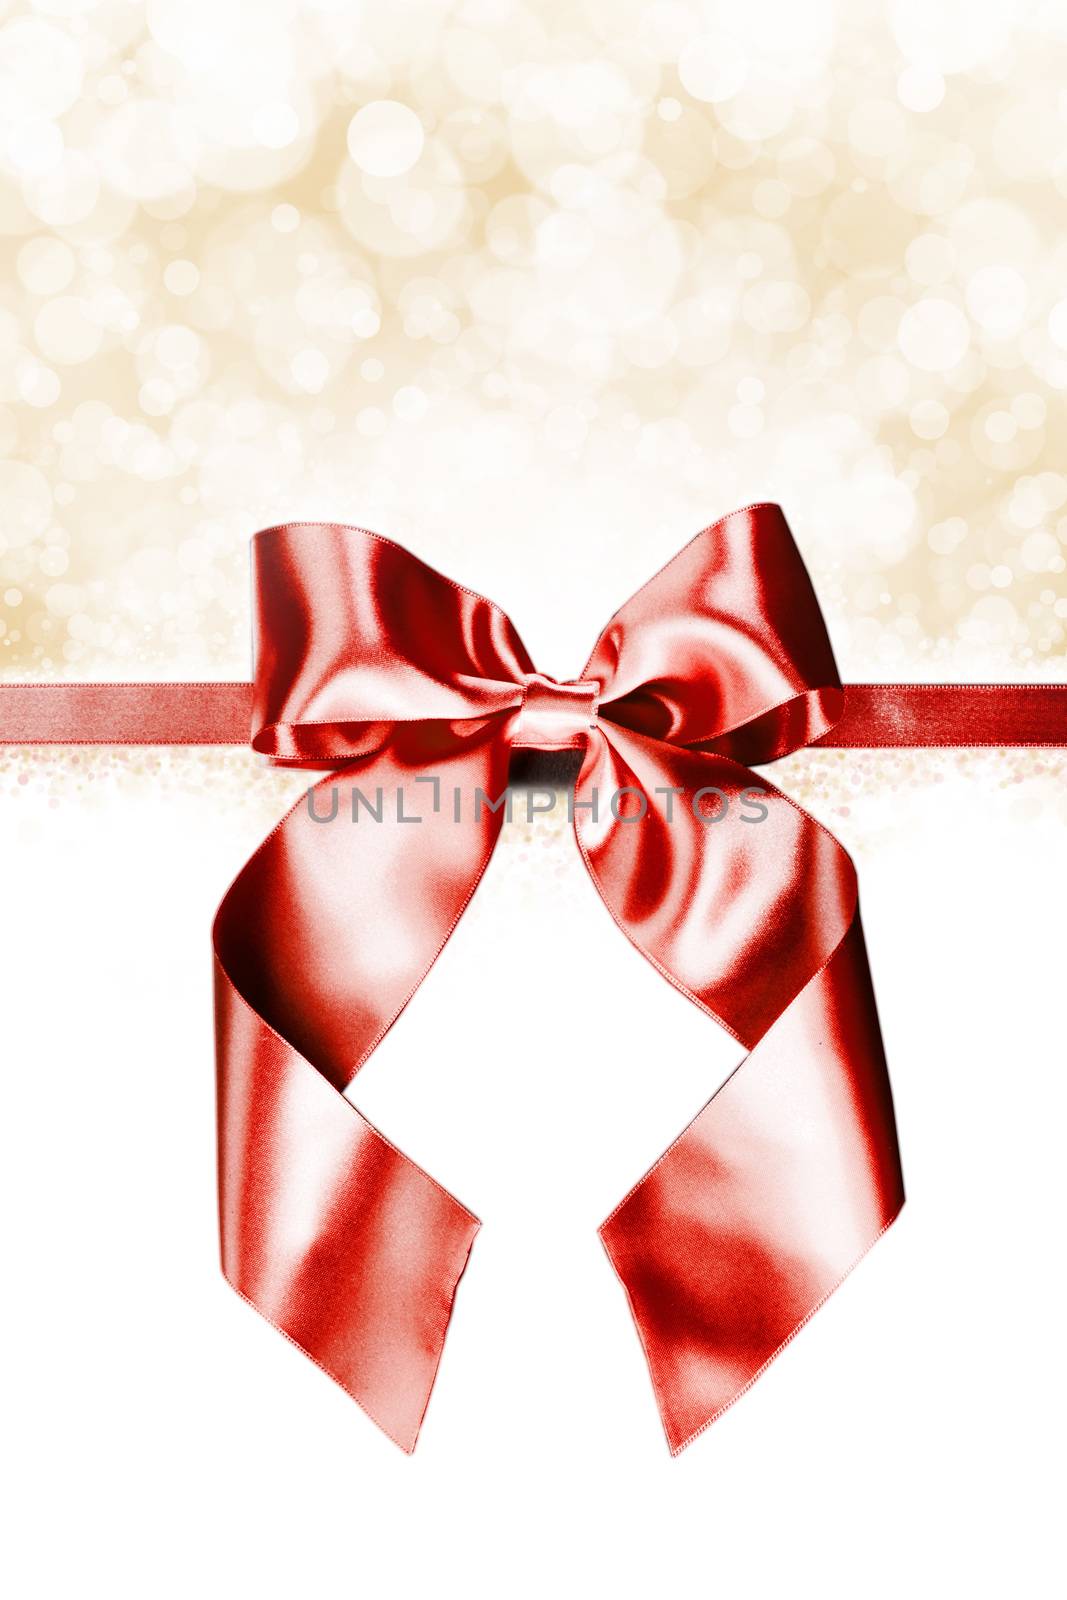 Red gift ribbon bow and golden bokeh isolated on white background